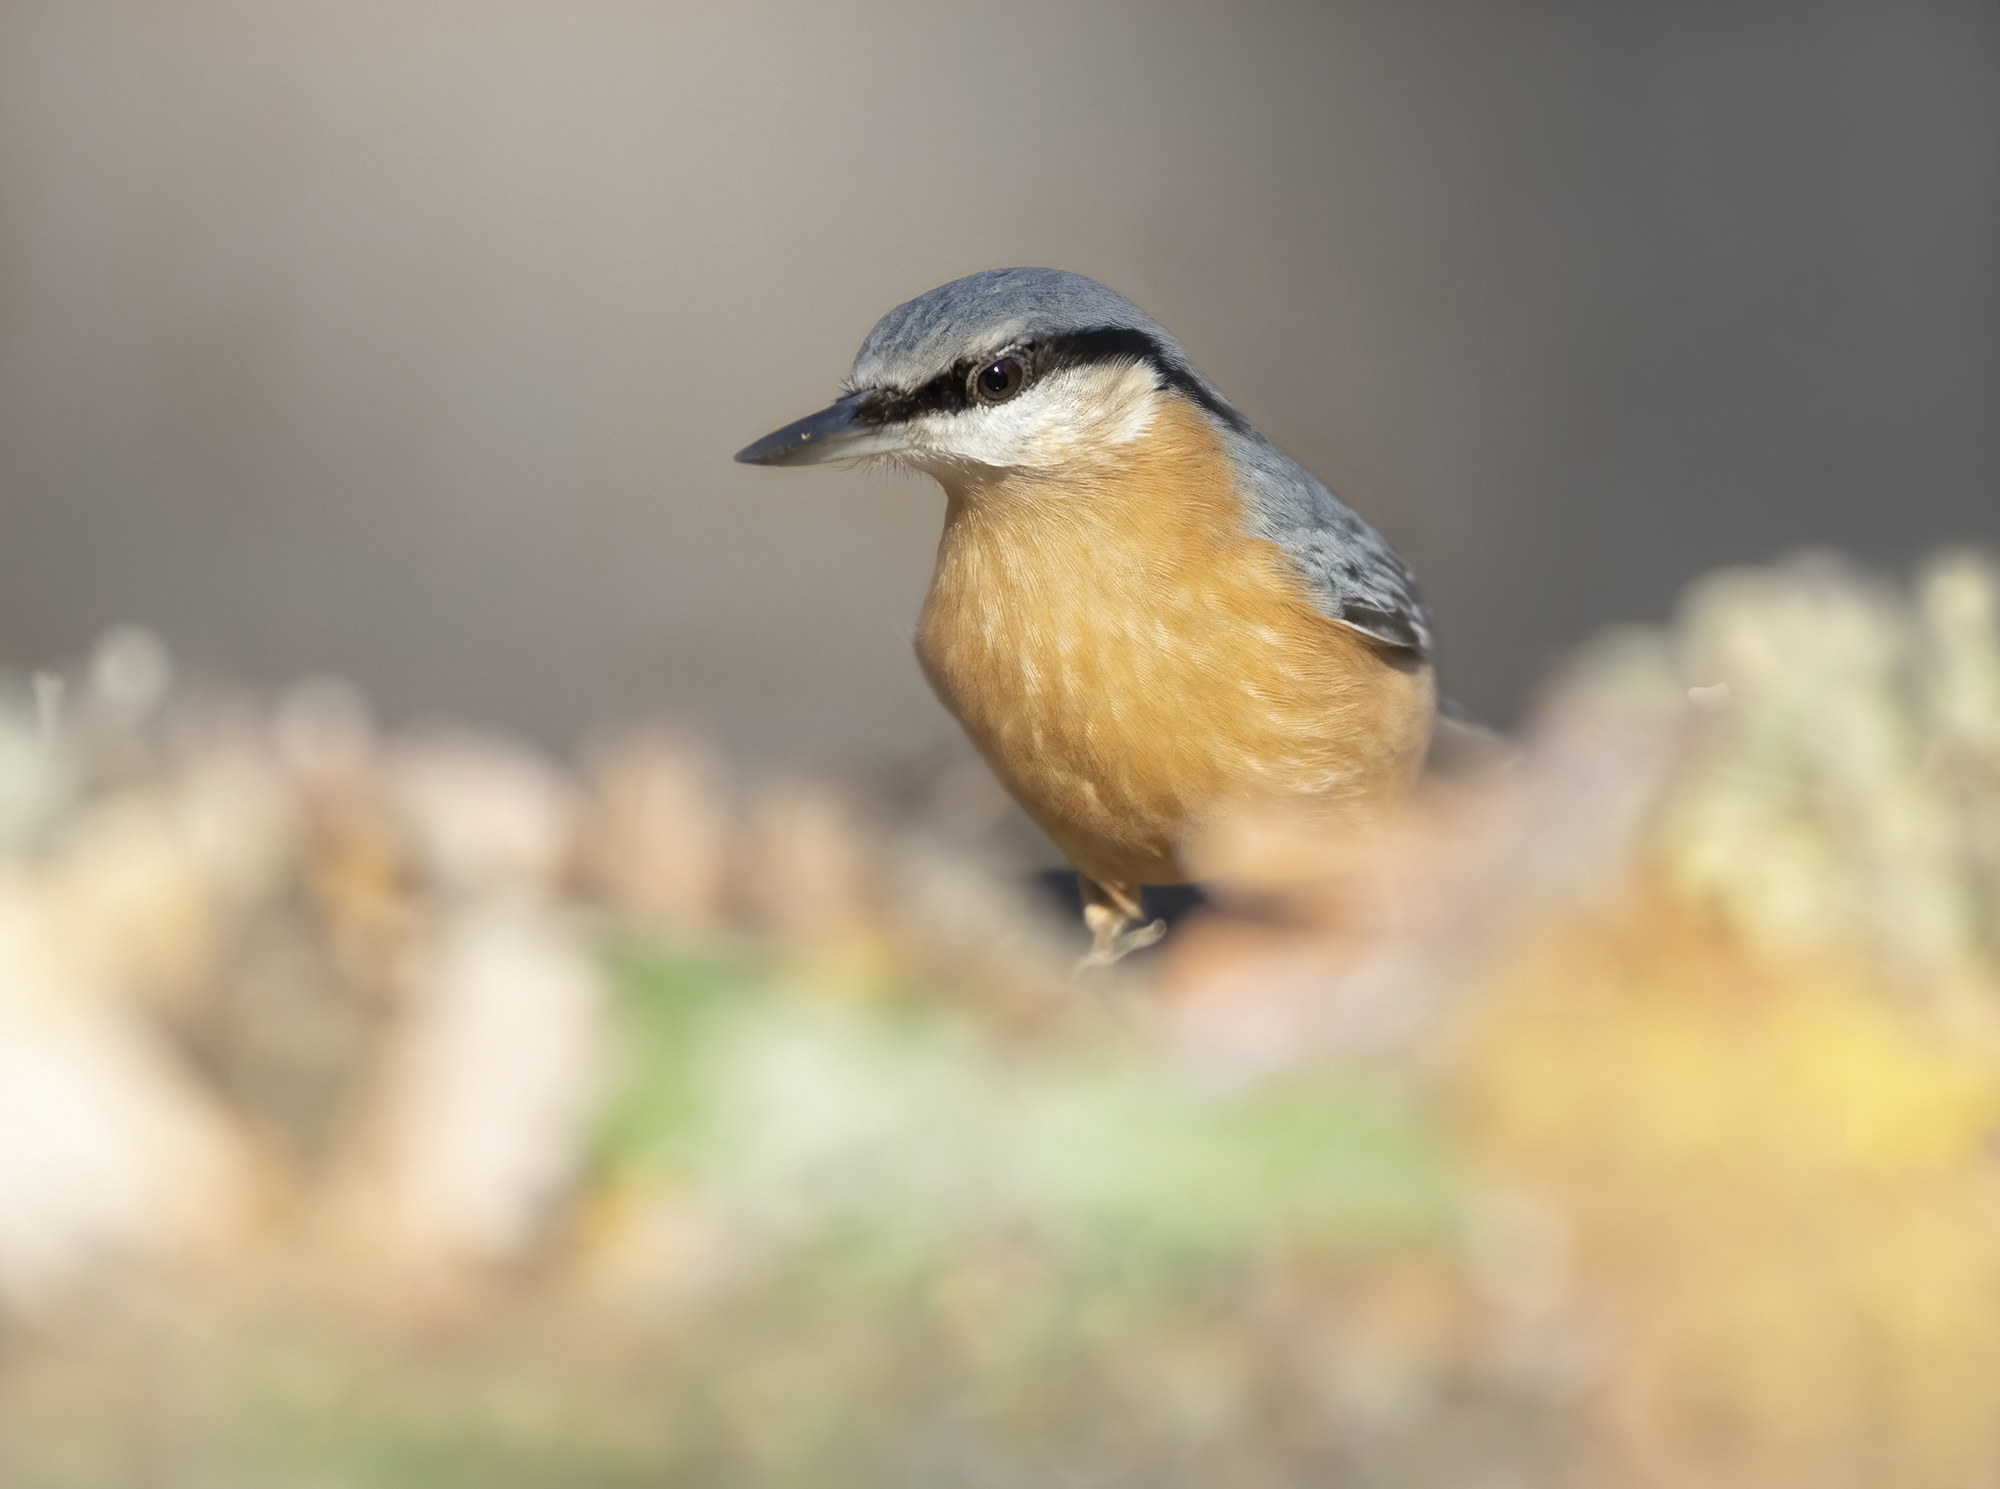 among autumn leaves, nuthatch...